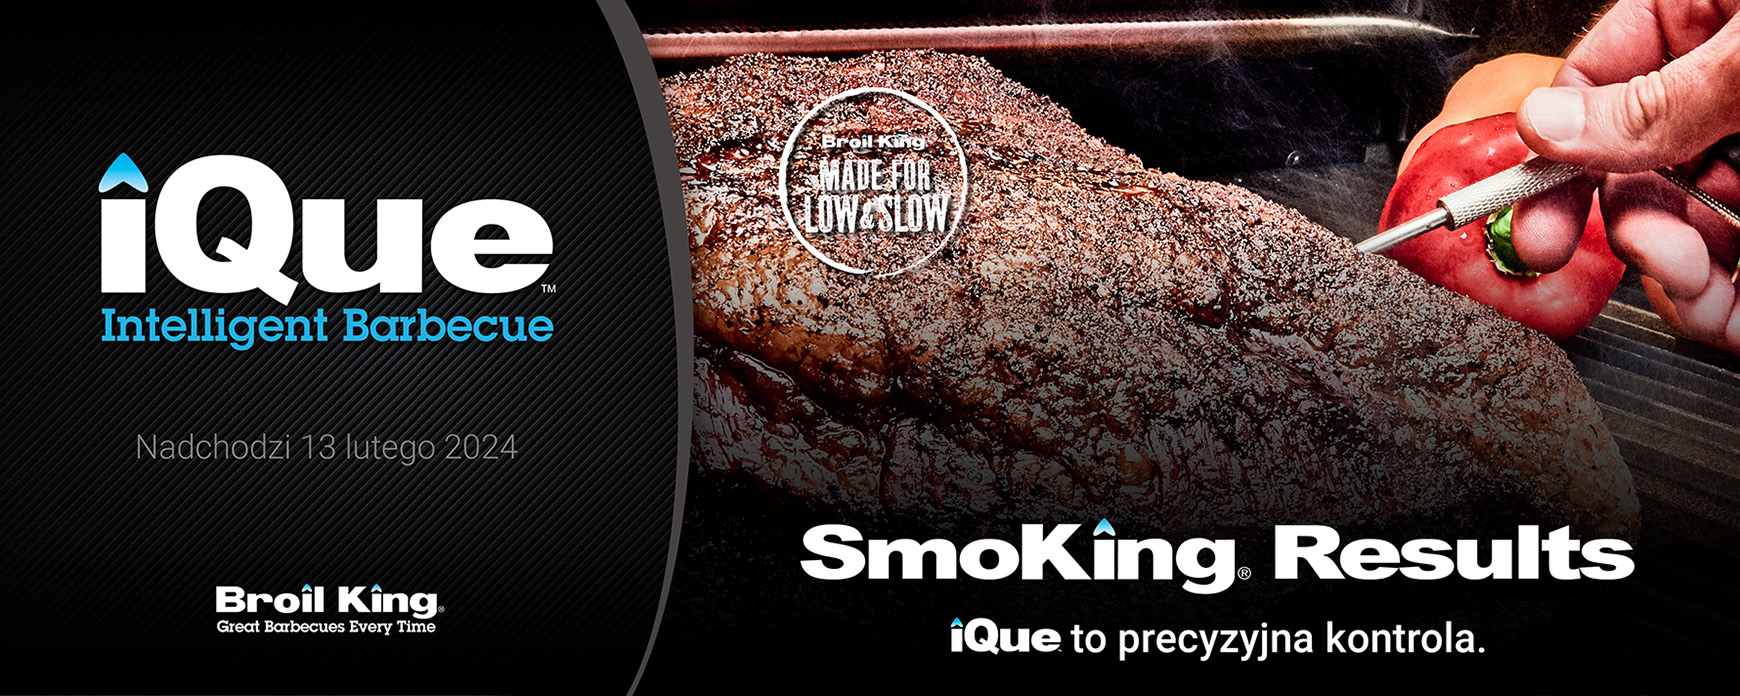 iQue - Broil King